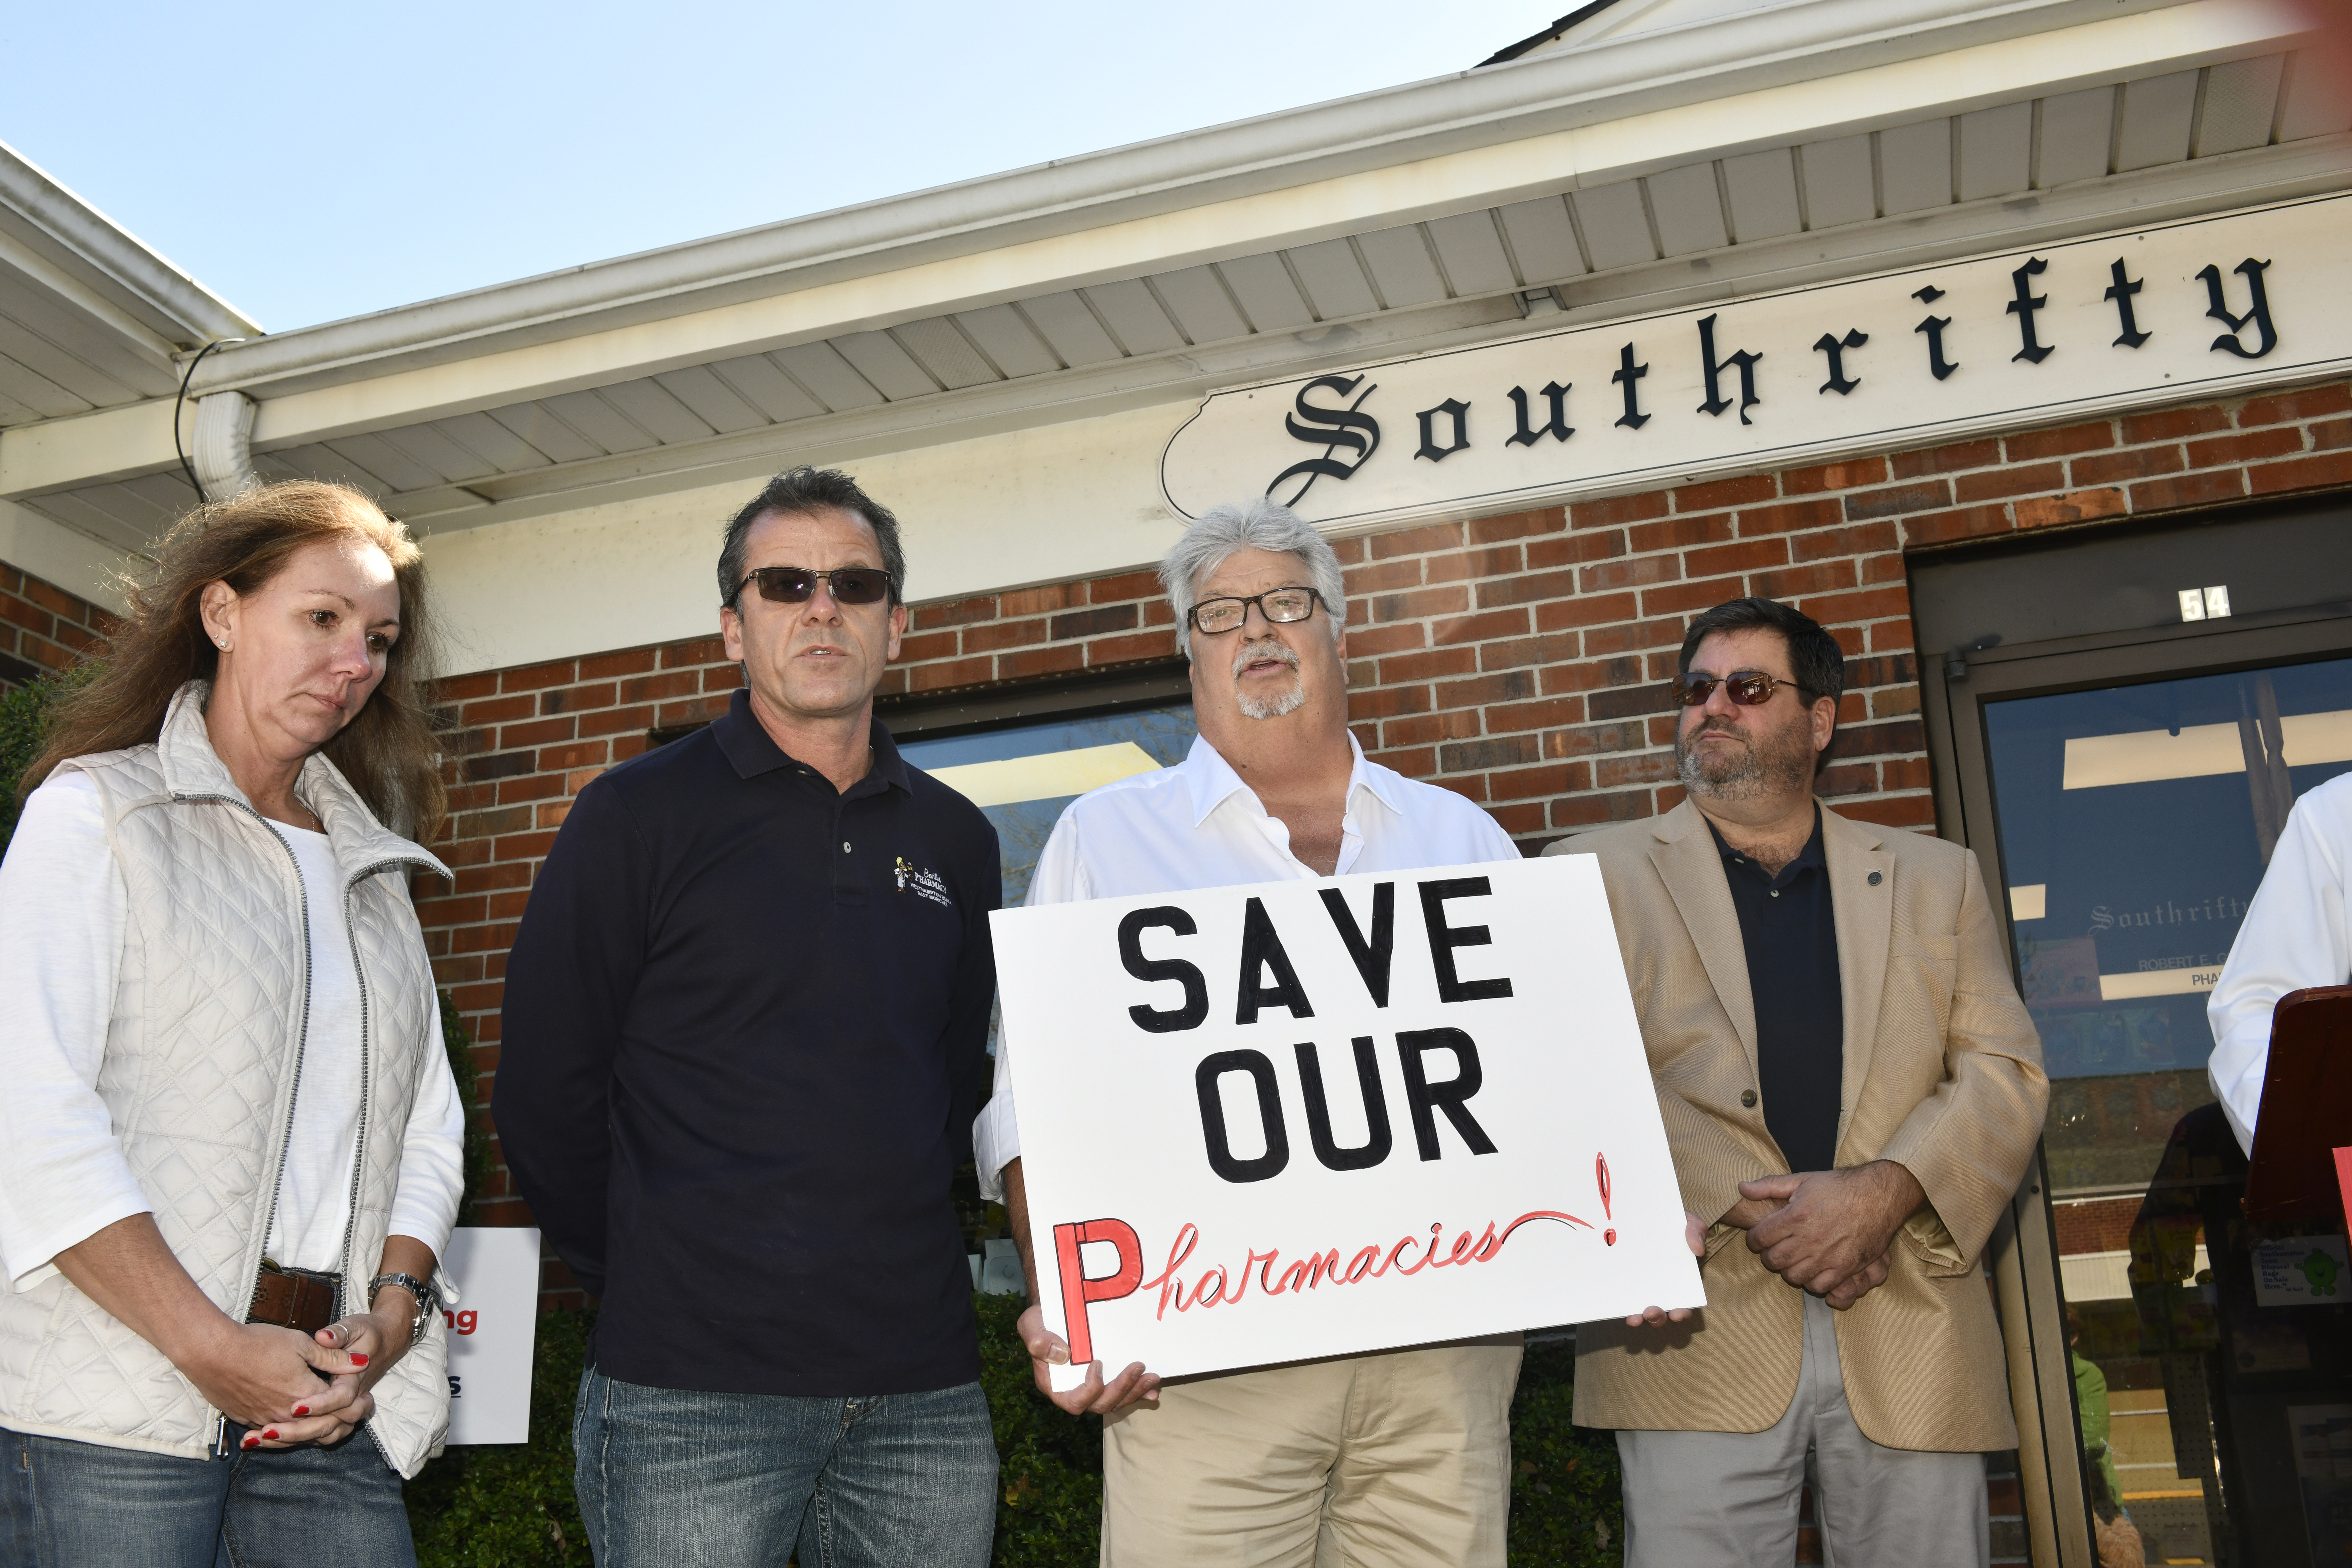 Sag Harbor Pharmacy owner Janice D'Angelo, Lou Cassara, pharmacist and owner of Barths Pharmacy, Gregg Torns of Park Place Chemist in East Hampton and Southampton Village Trustee Richard Yastrzemski at a rally against PBMs at Southrifty Drugs in Southampton Village on Wednesday, October 23. DANA SHAW